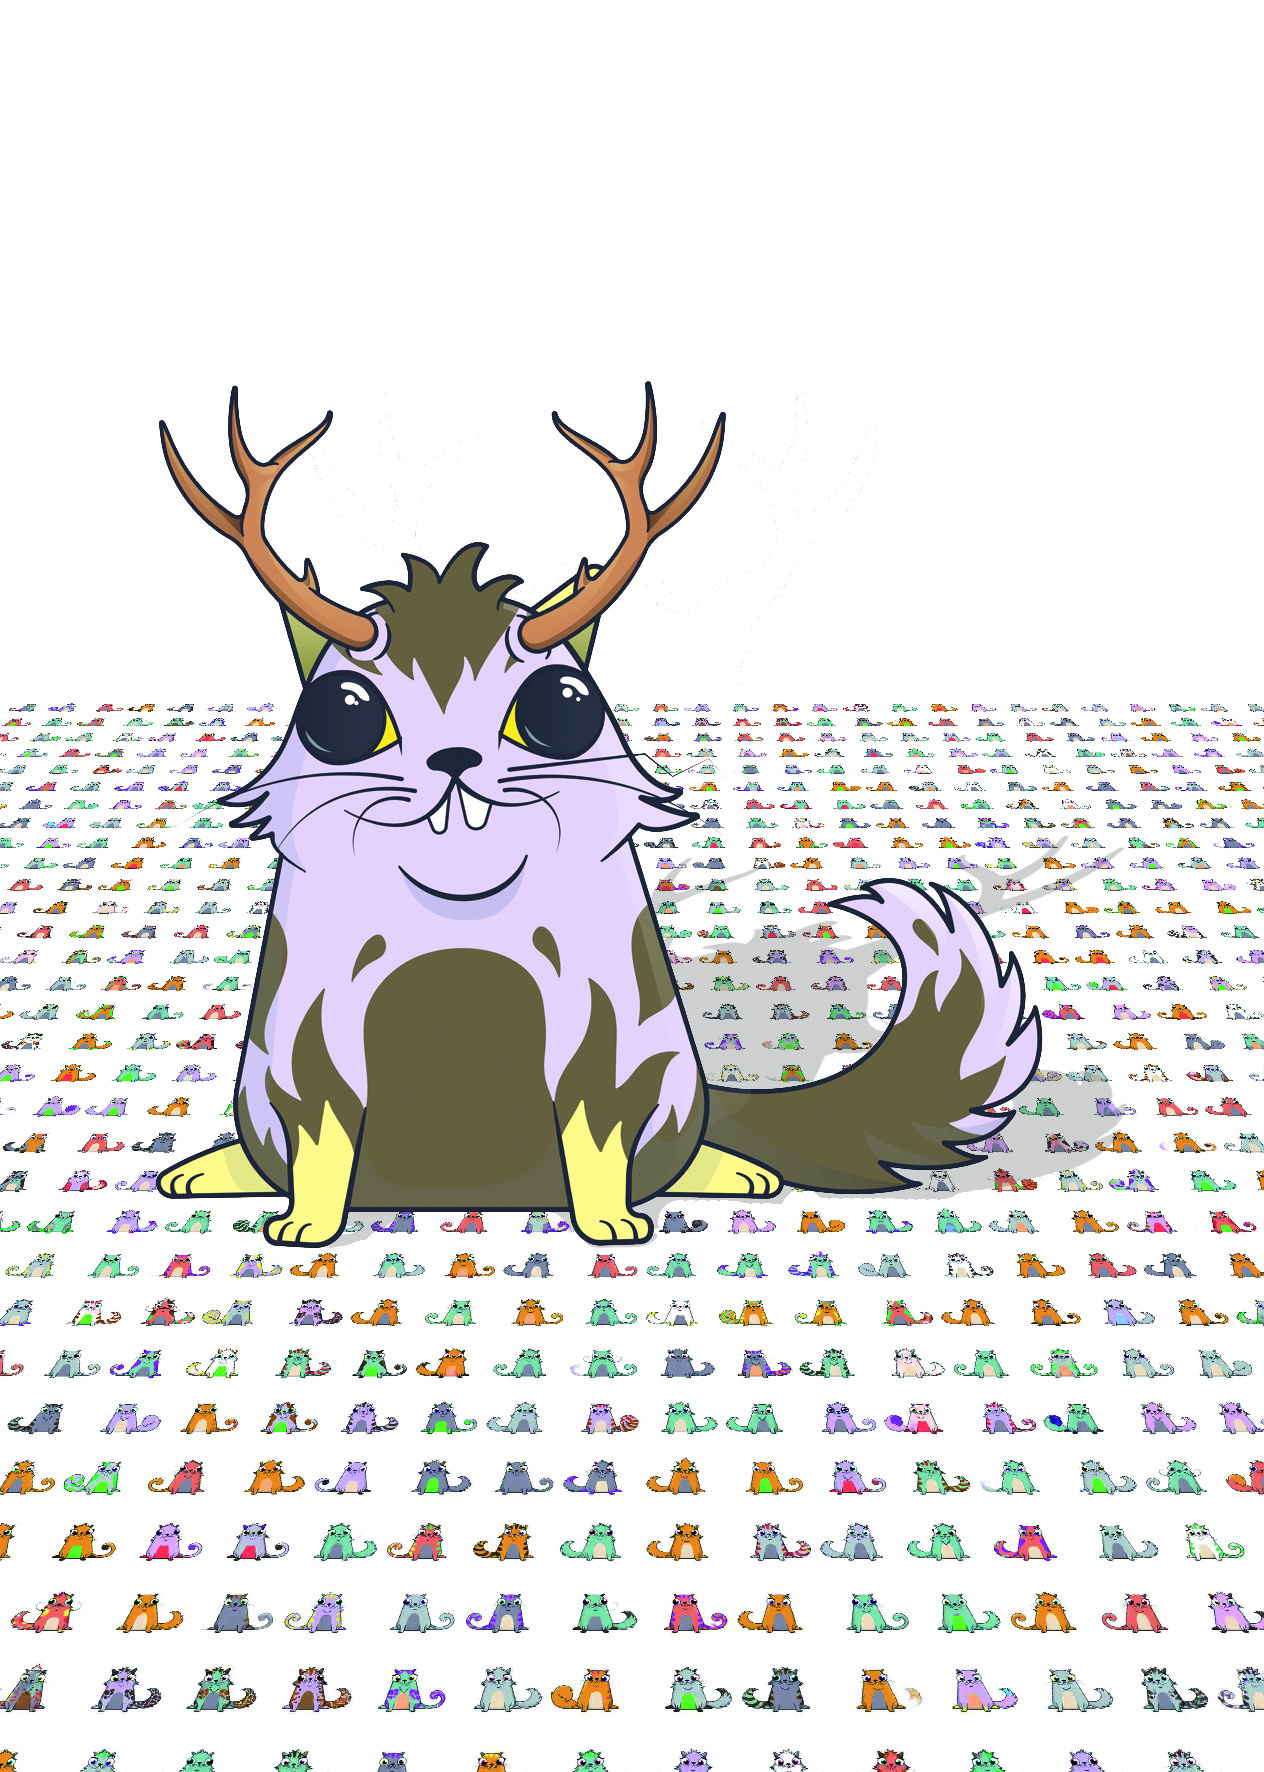 The graphic shows a so-called cryptokitty, a purple cat with deer antlers. 